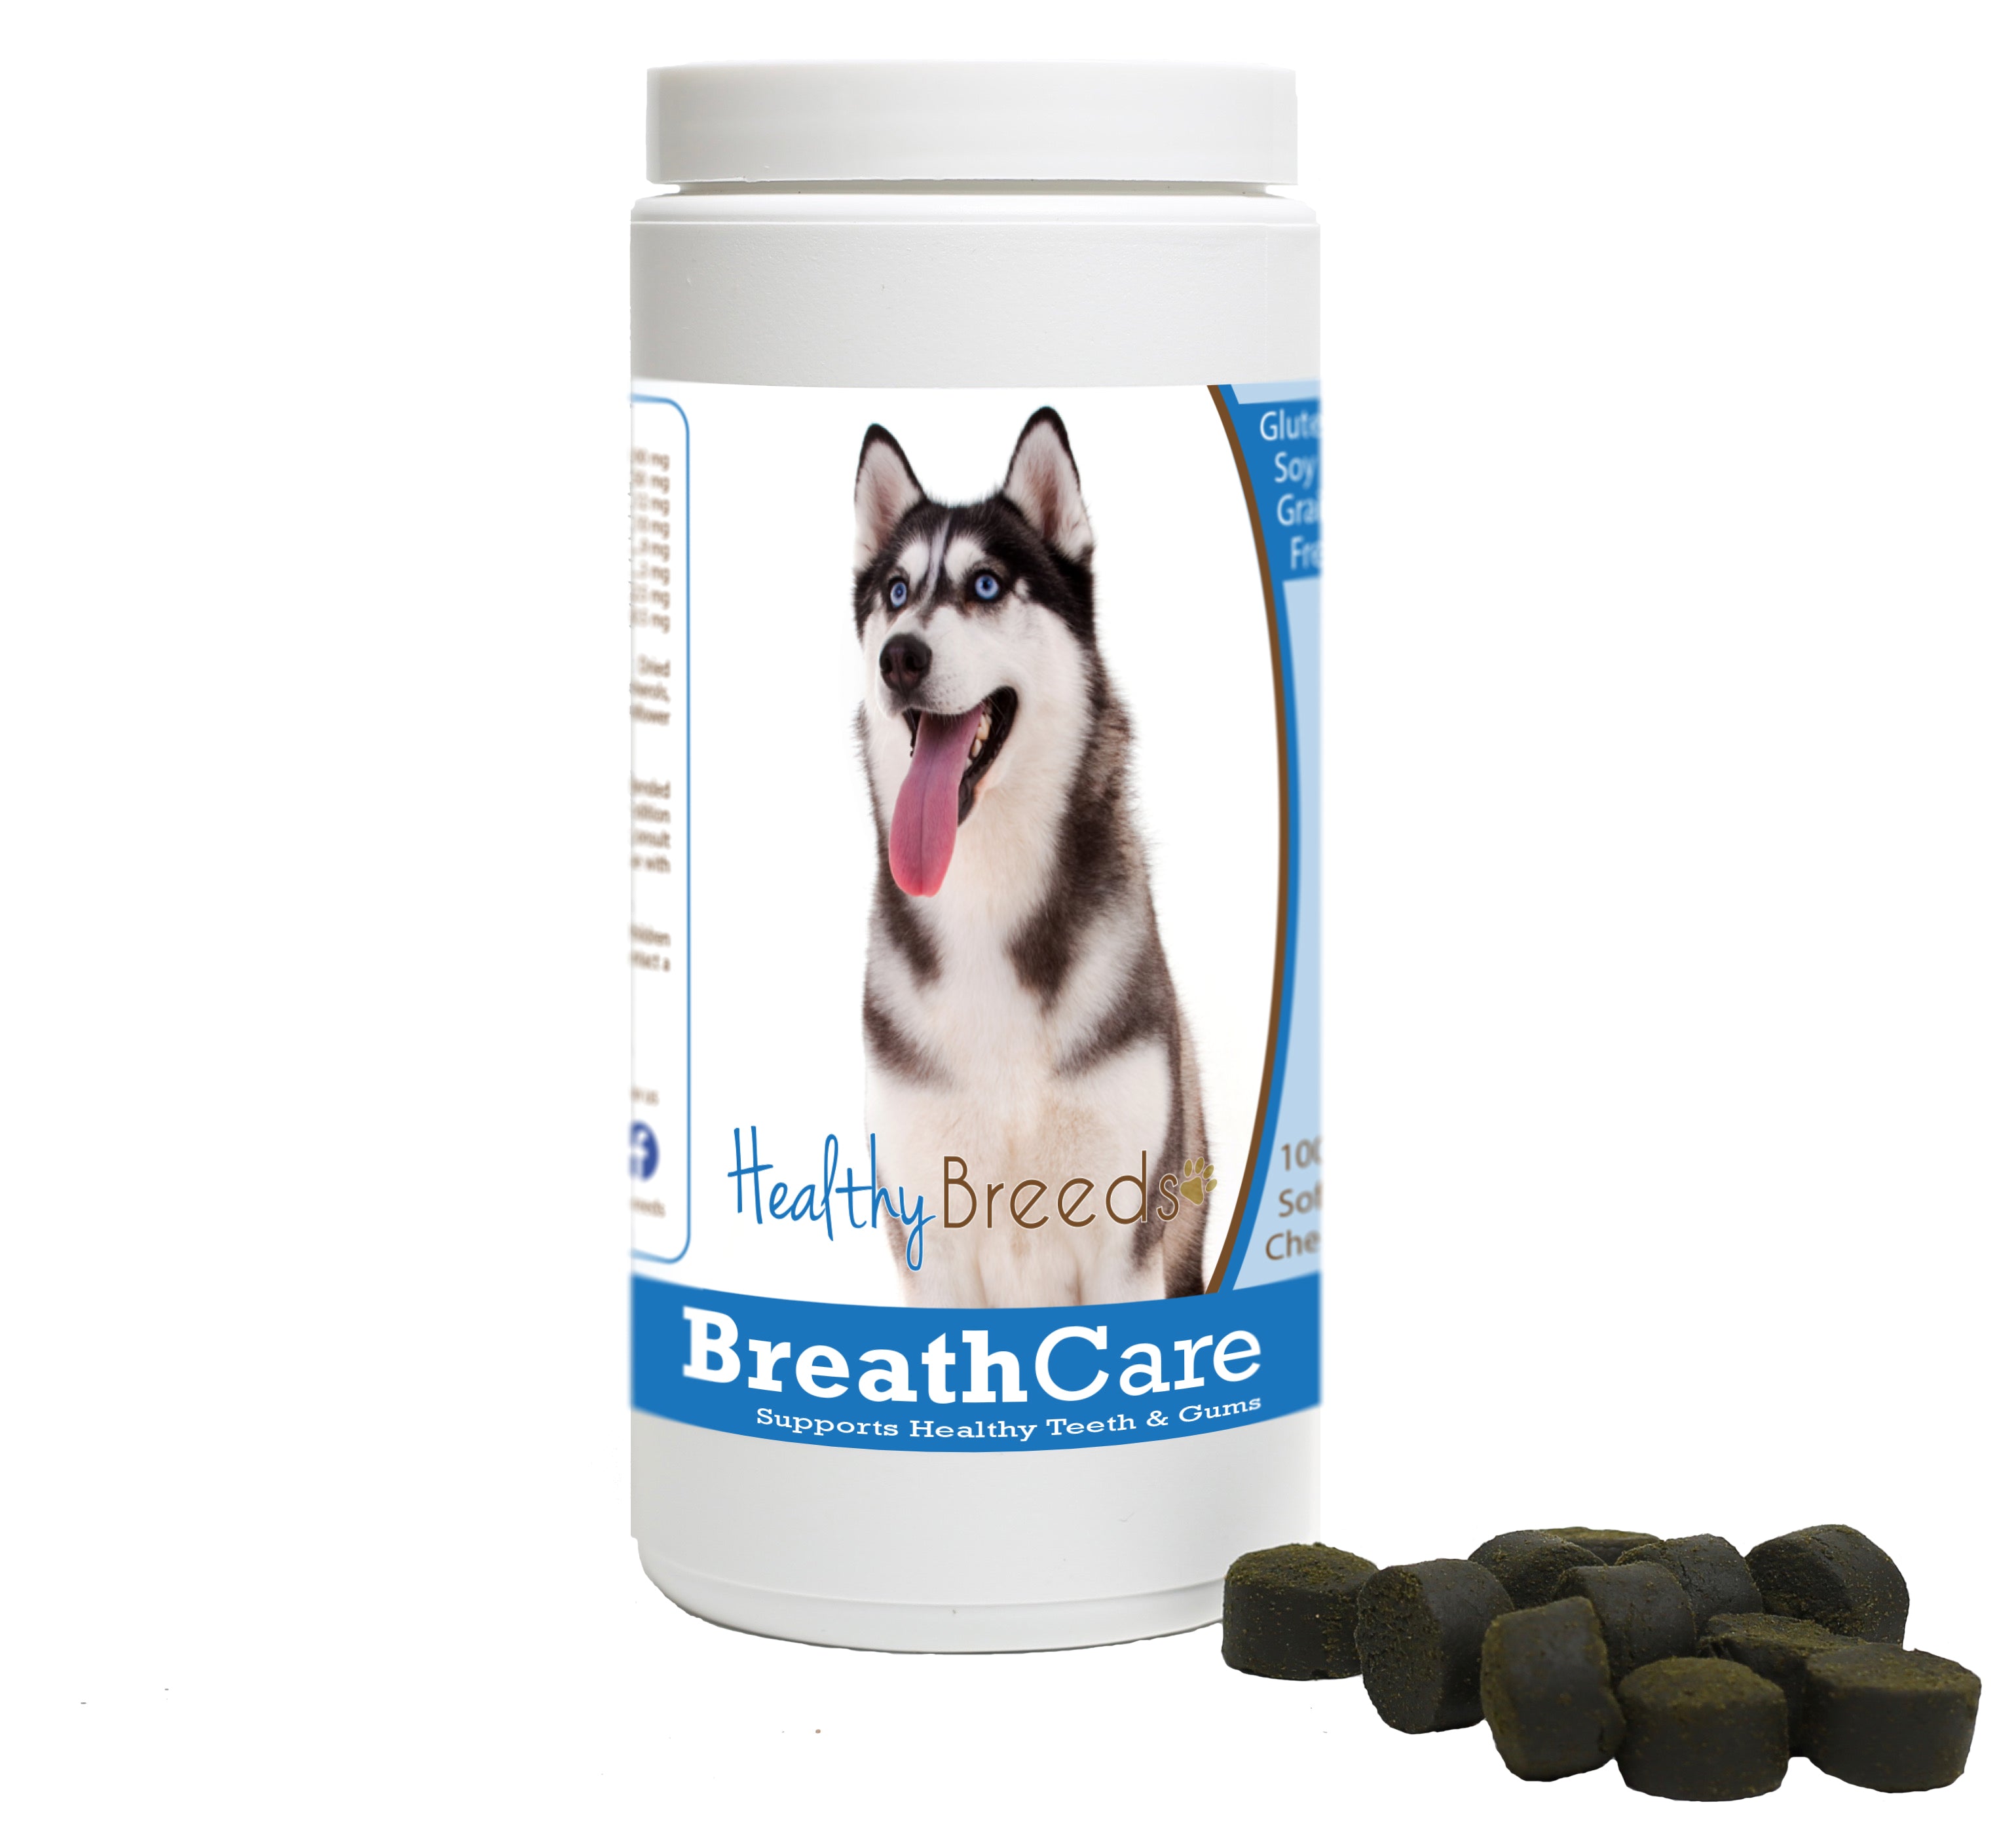 Siberian Husky Breath Care Soft Chews for Dogs 60 Count